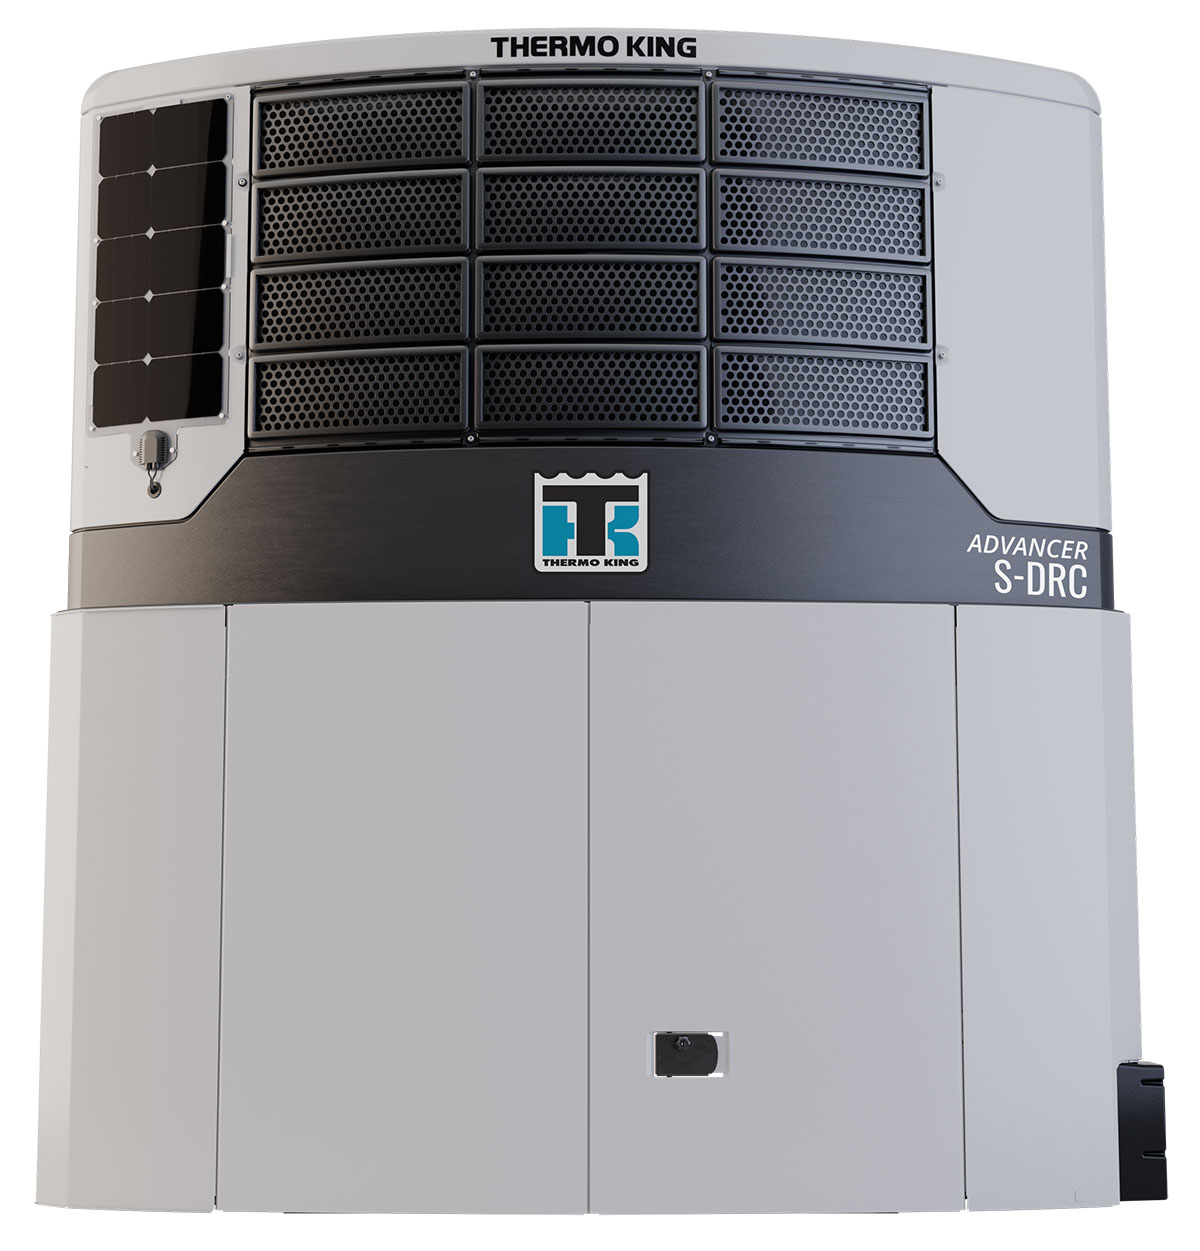 Advancer range and specifications - Thermo King